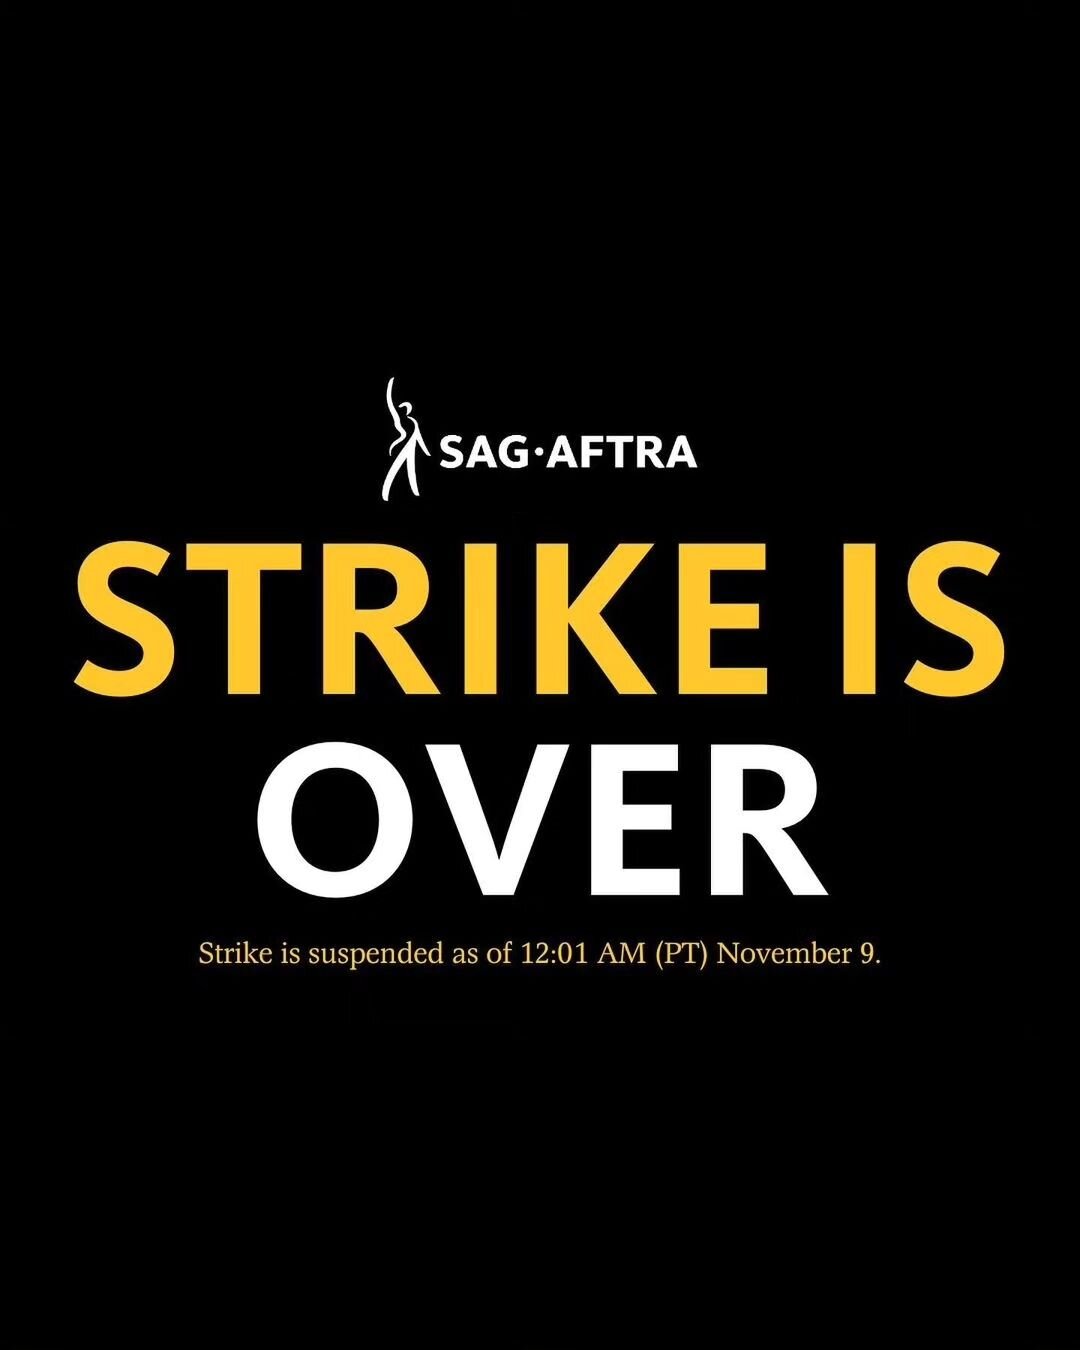 If there's one thing I've learned from this entire year of labor union strikes (not just actors.... but writers, auto workers, UPS workers, teachers, and so many more) it's that change really can happen when people unite, stay organized, and collecti